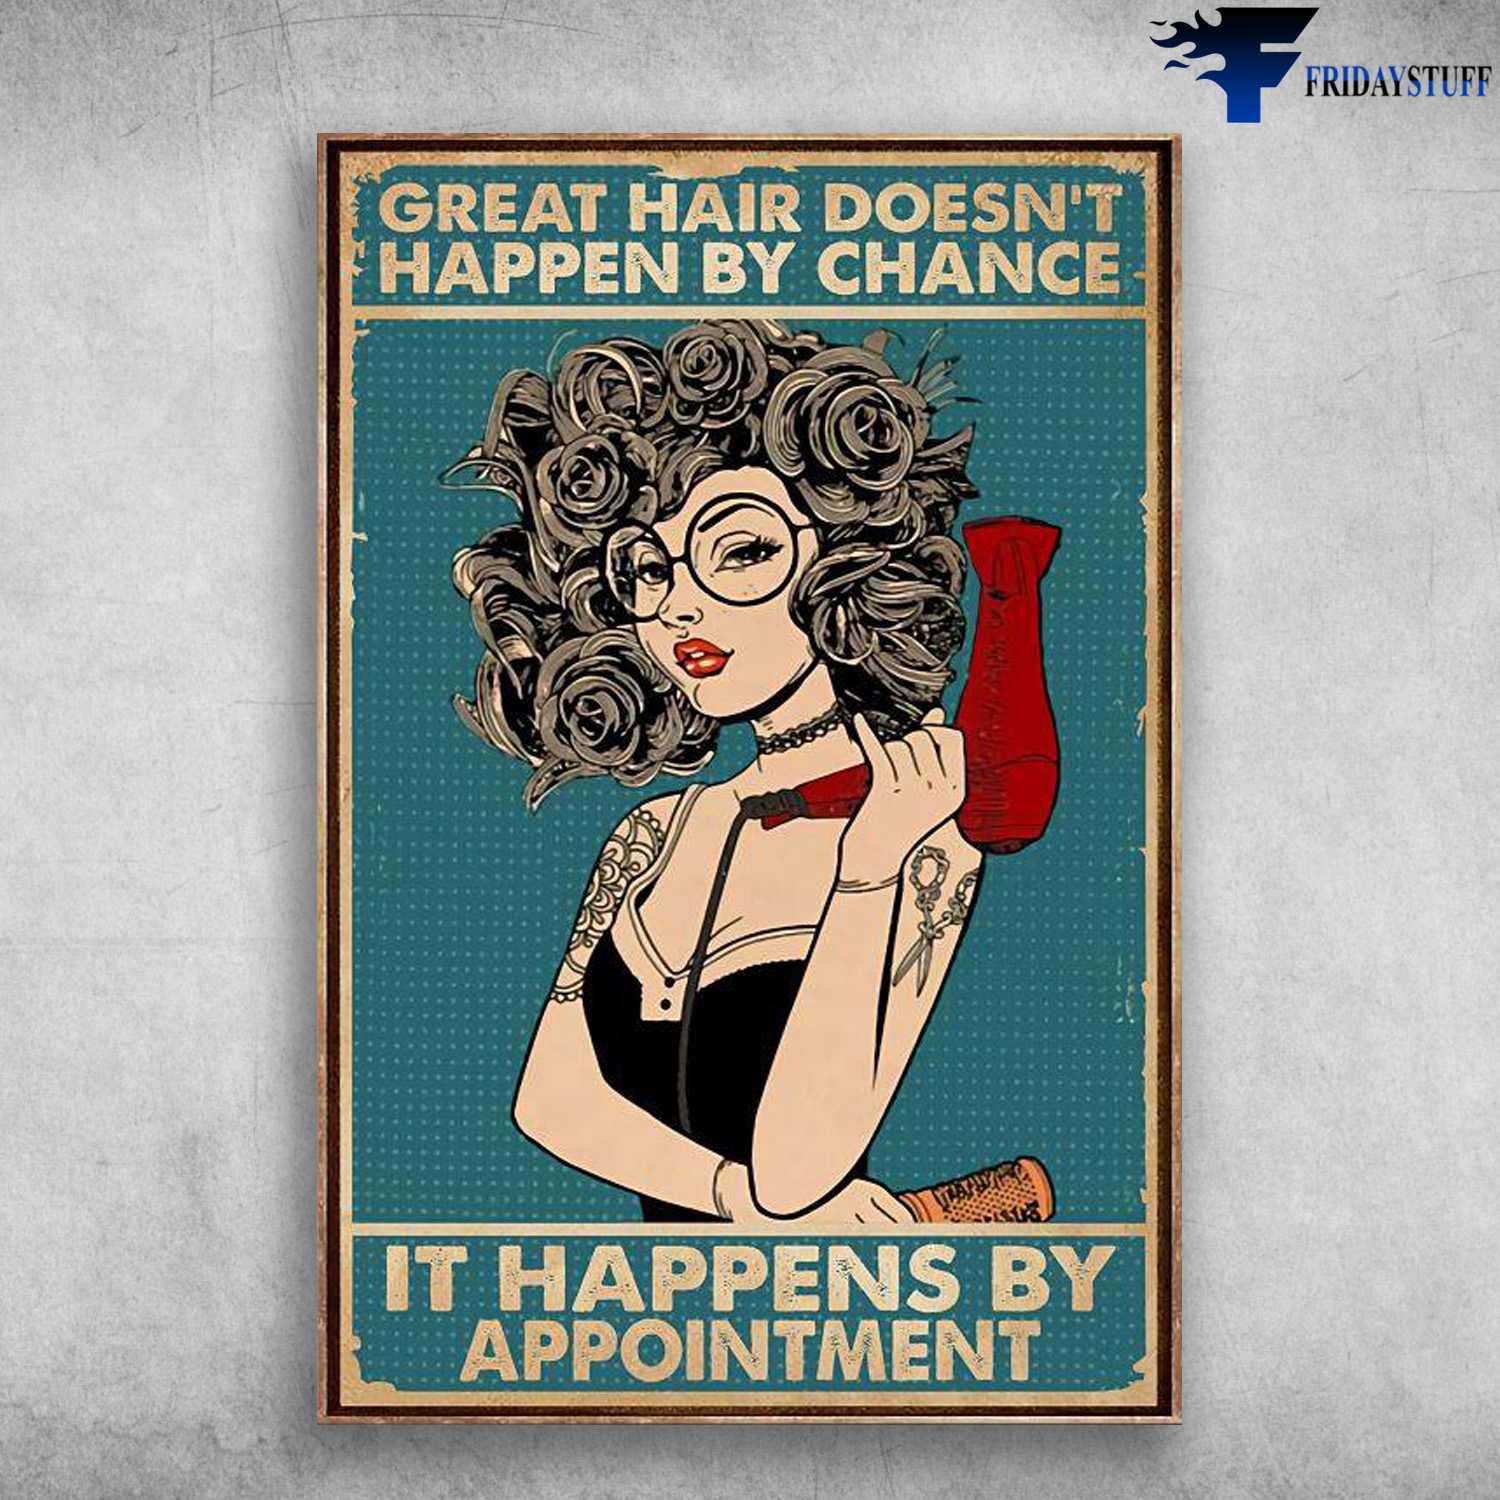 Hair Salon, Hairdresser Poster, Great Hair Doesn't Happen By Chance, It Happens By Appointment